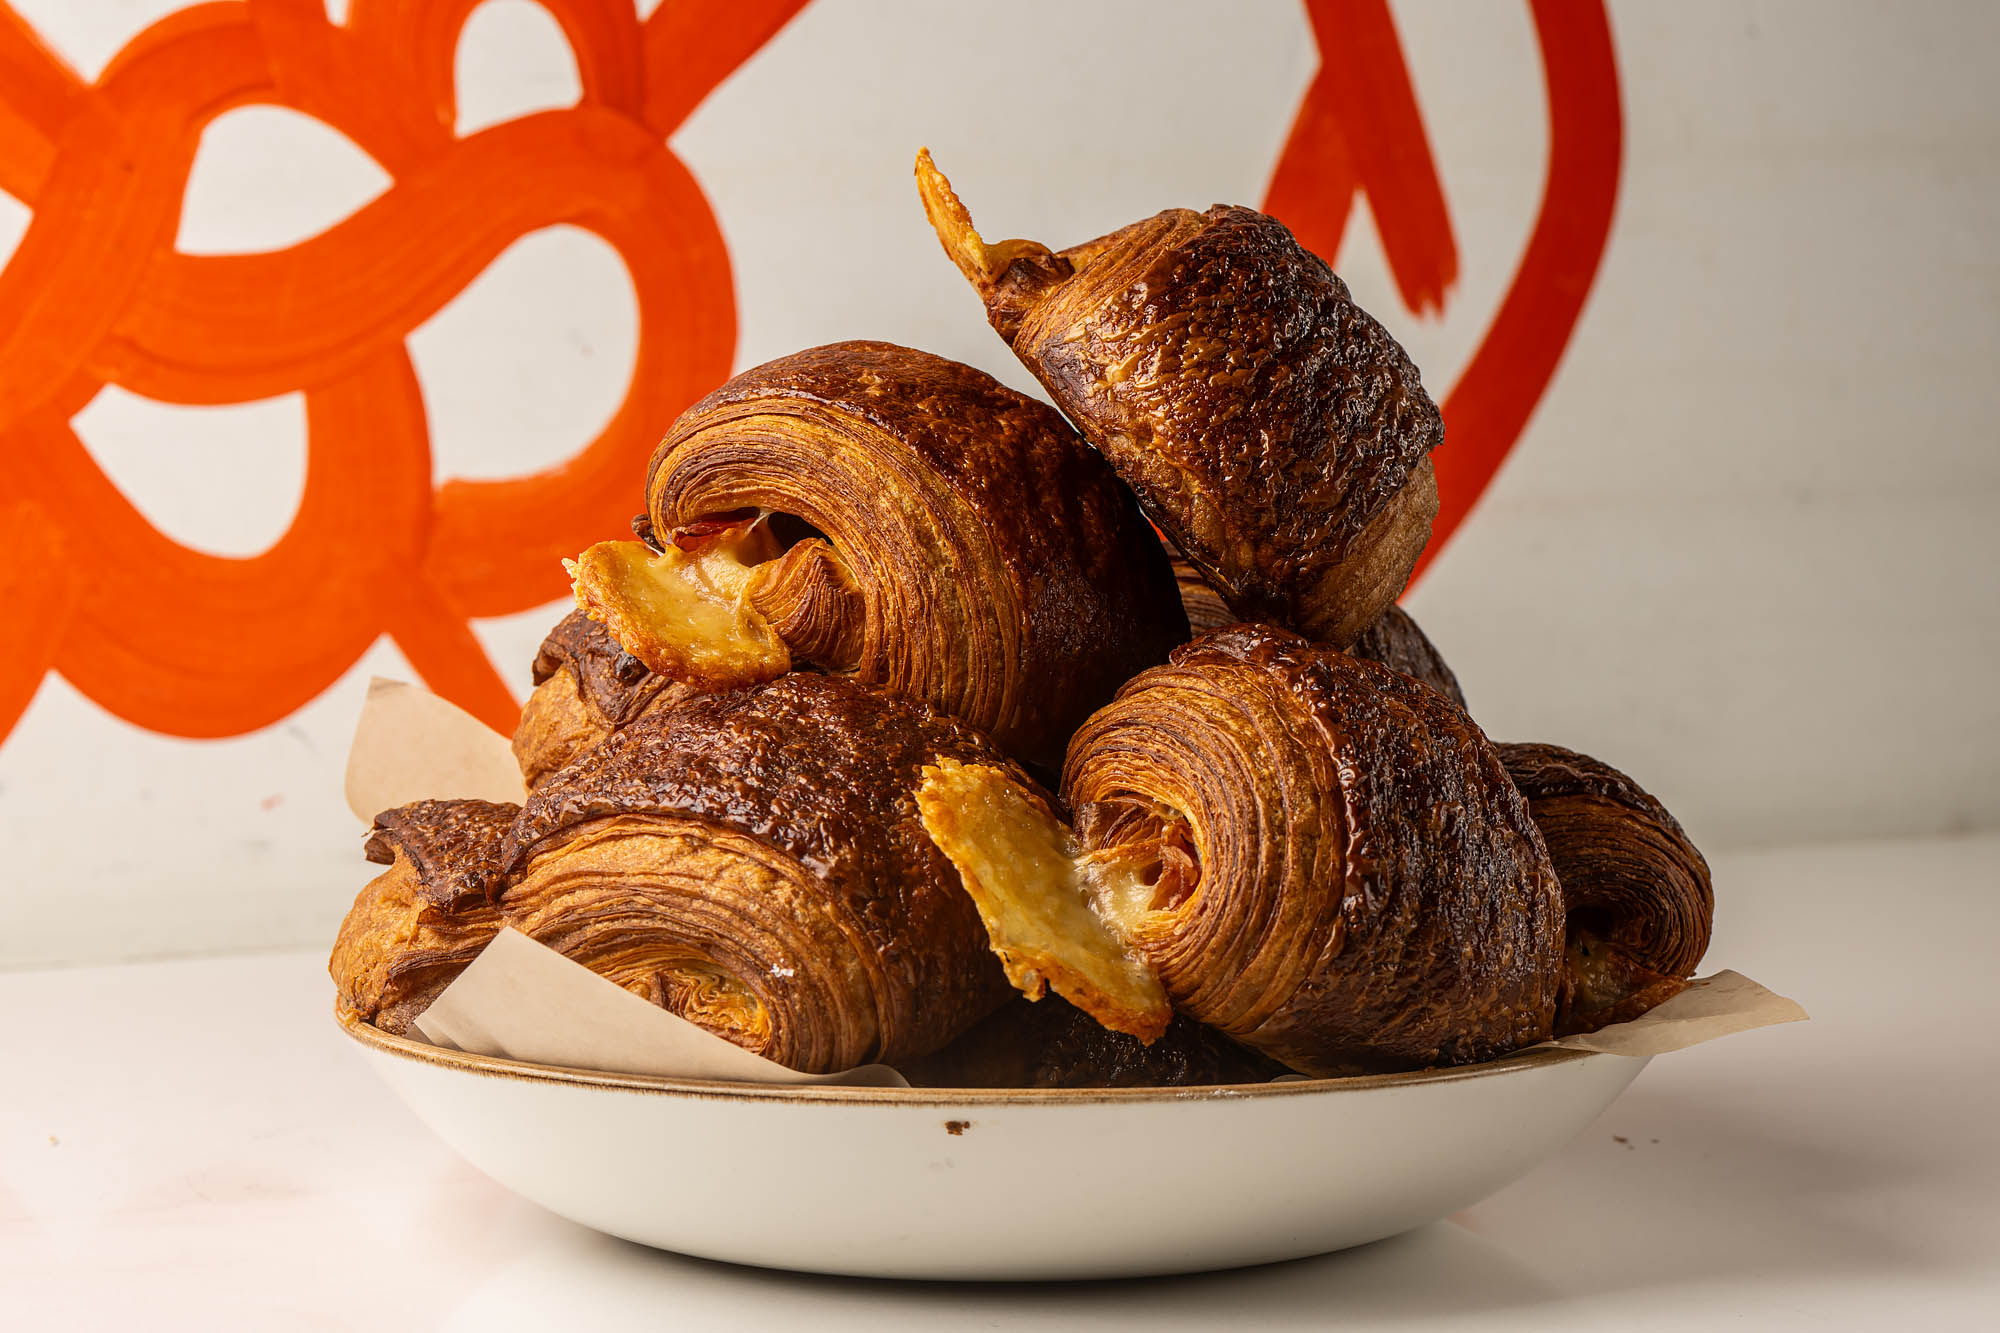 A wide bowl of croissants with layers shown at sides, plus leaks of cheese.